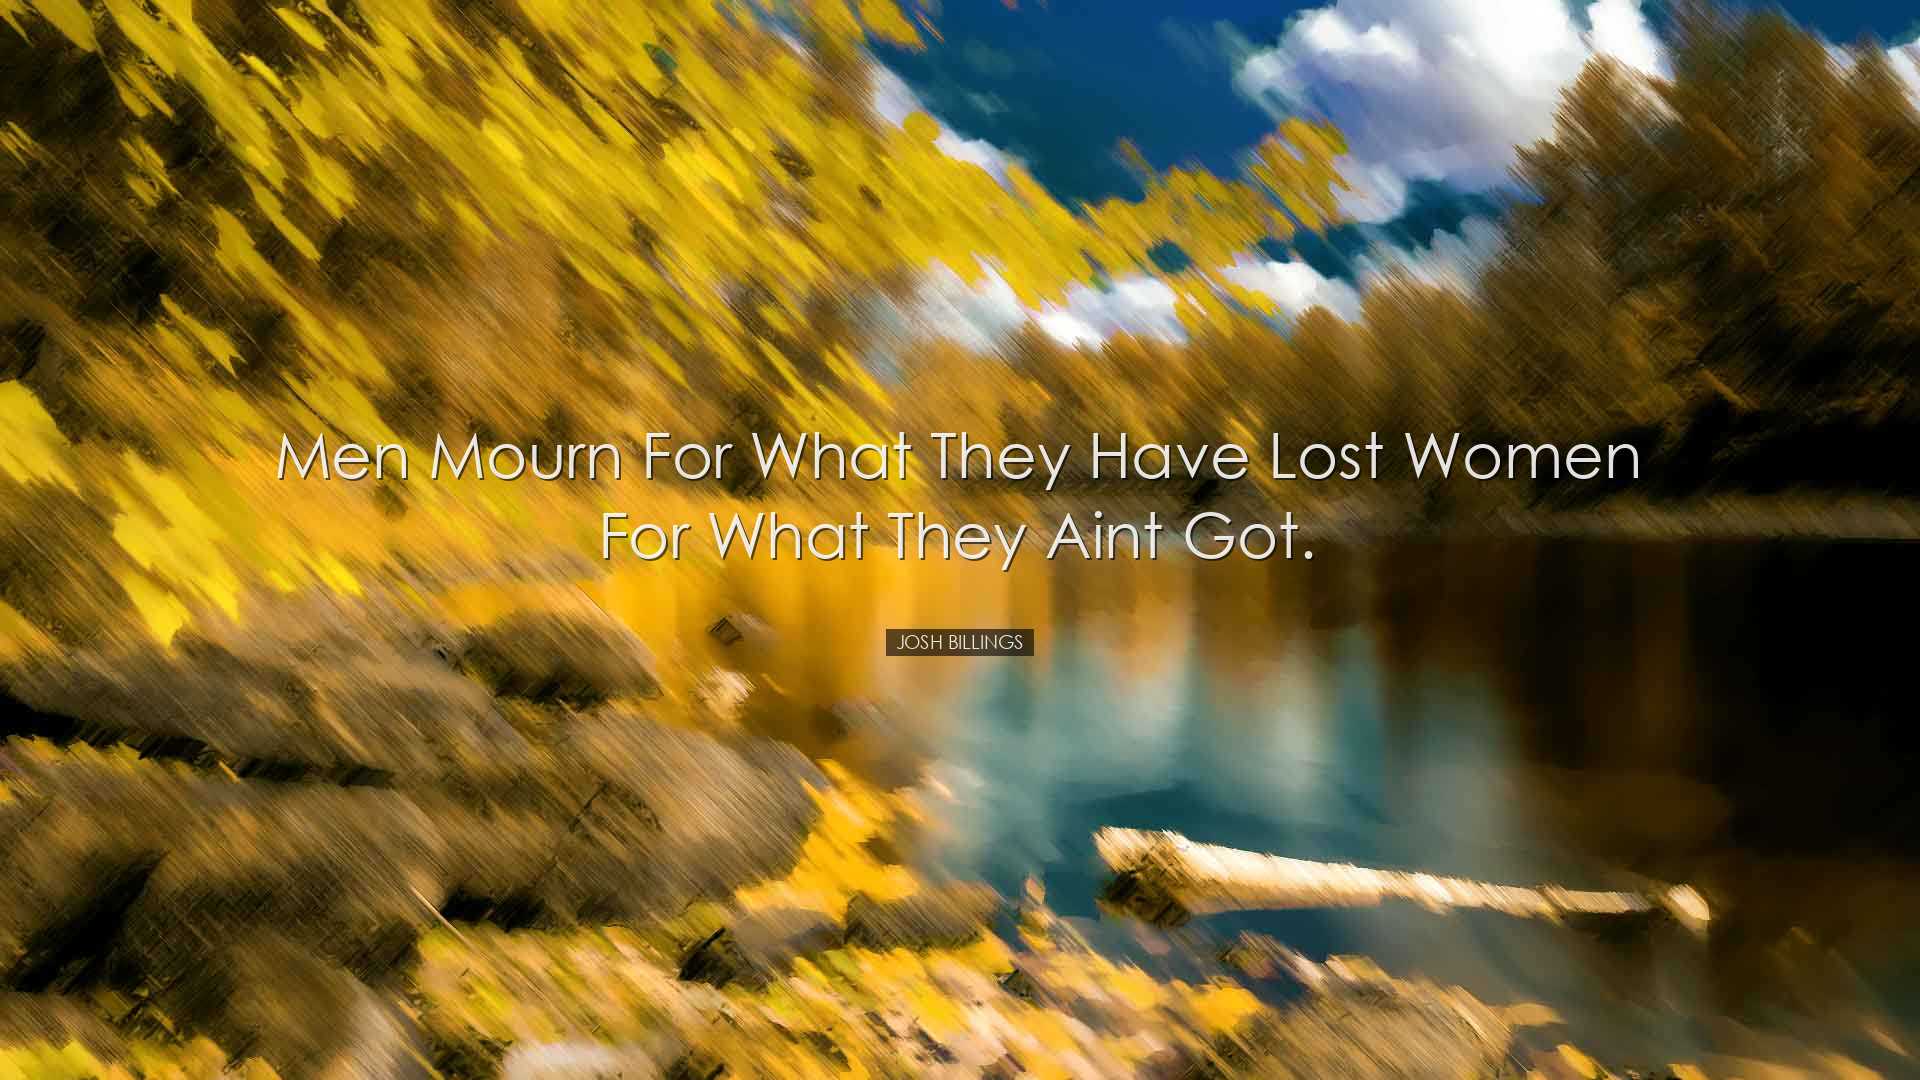 Men mourn for what they have lost women for what they aint got. -